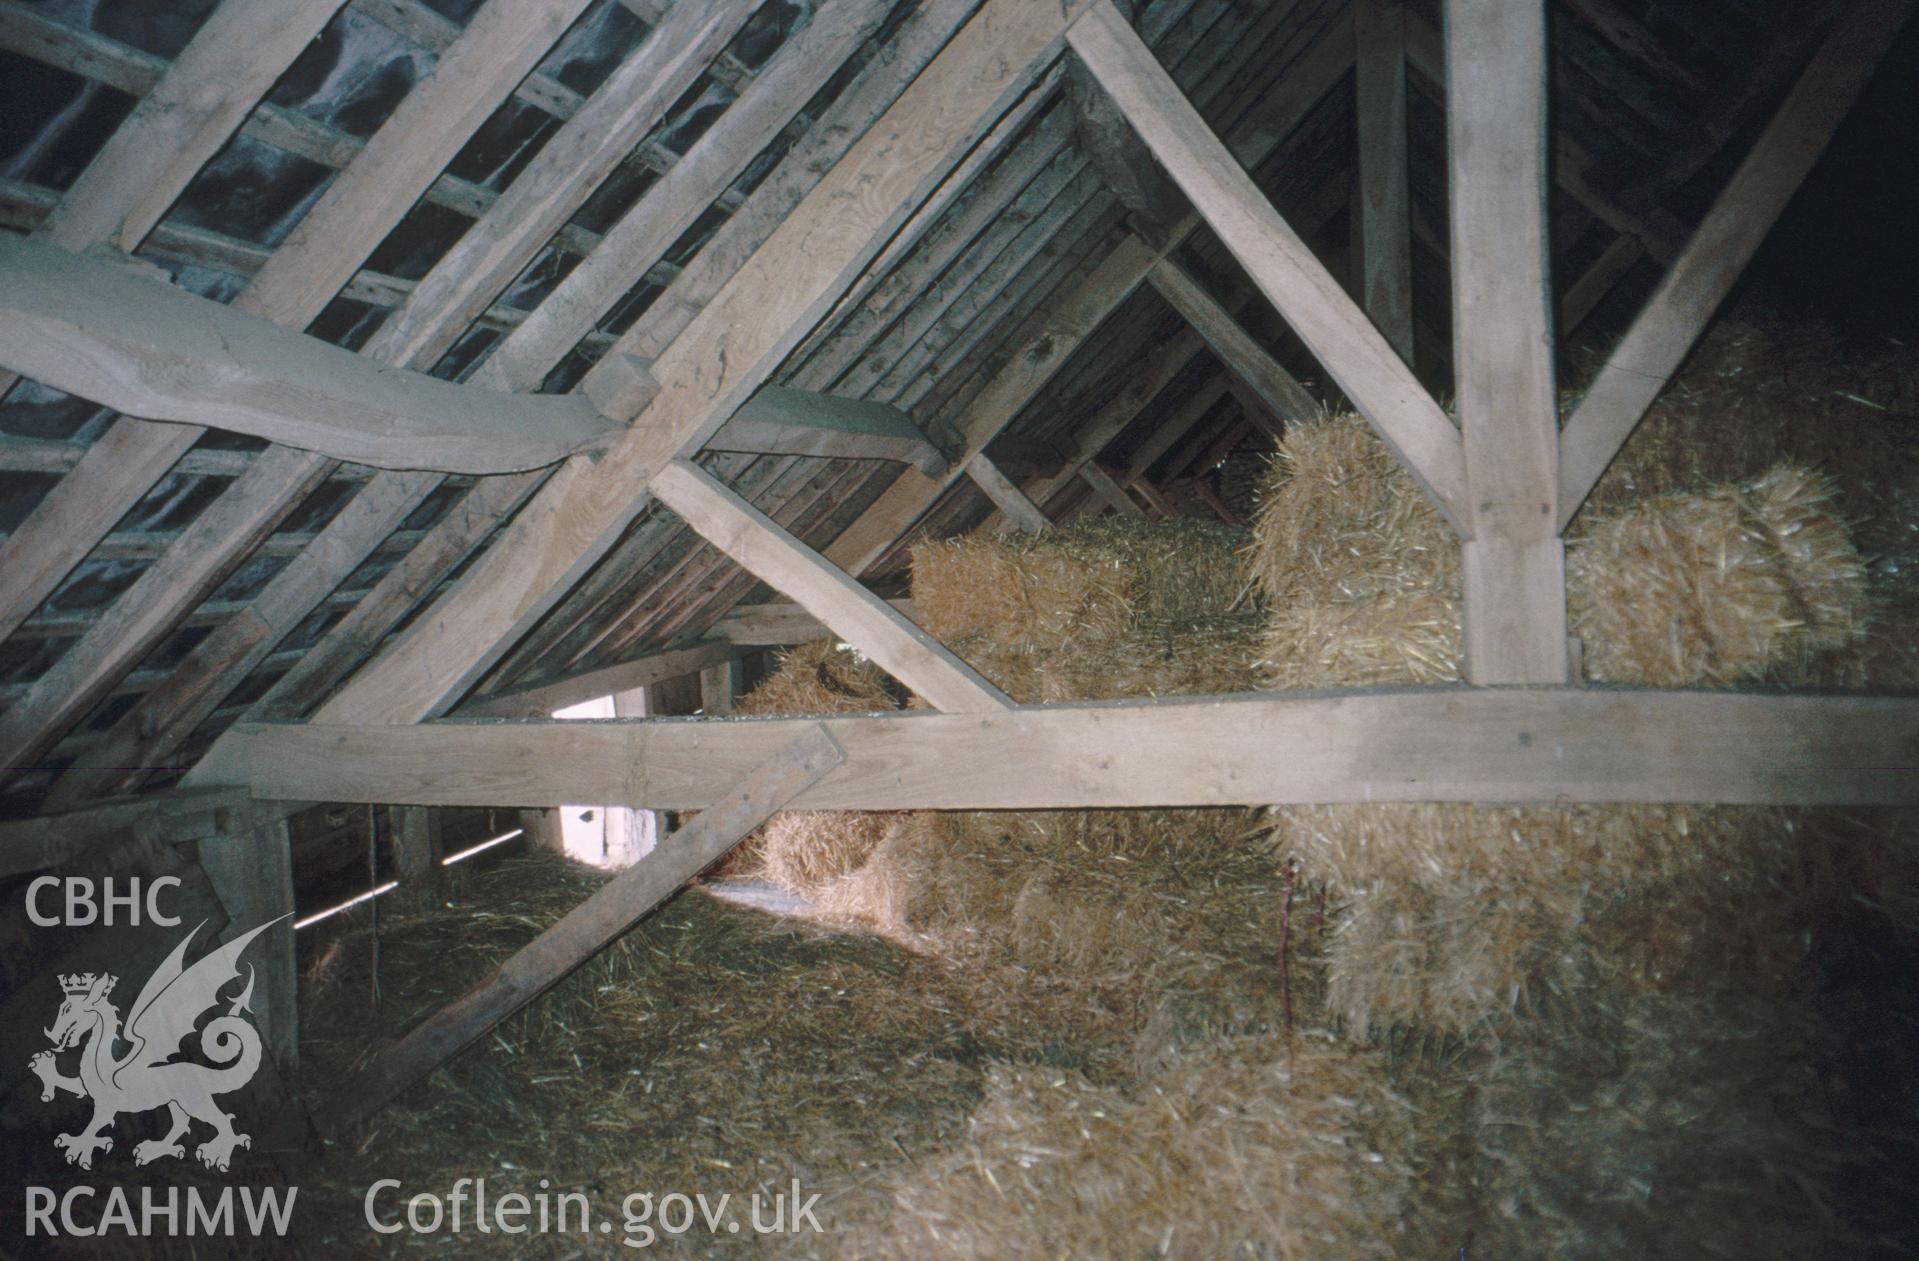 Digital copy of a colour slide showing interior roof structure at Pilleth Court Farm Building, produced by Geoff Ward.